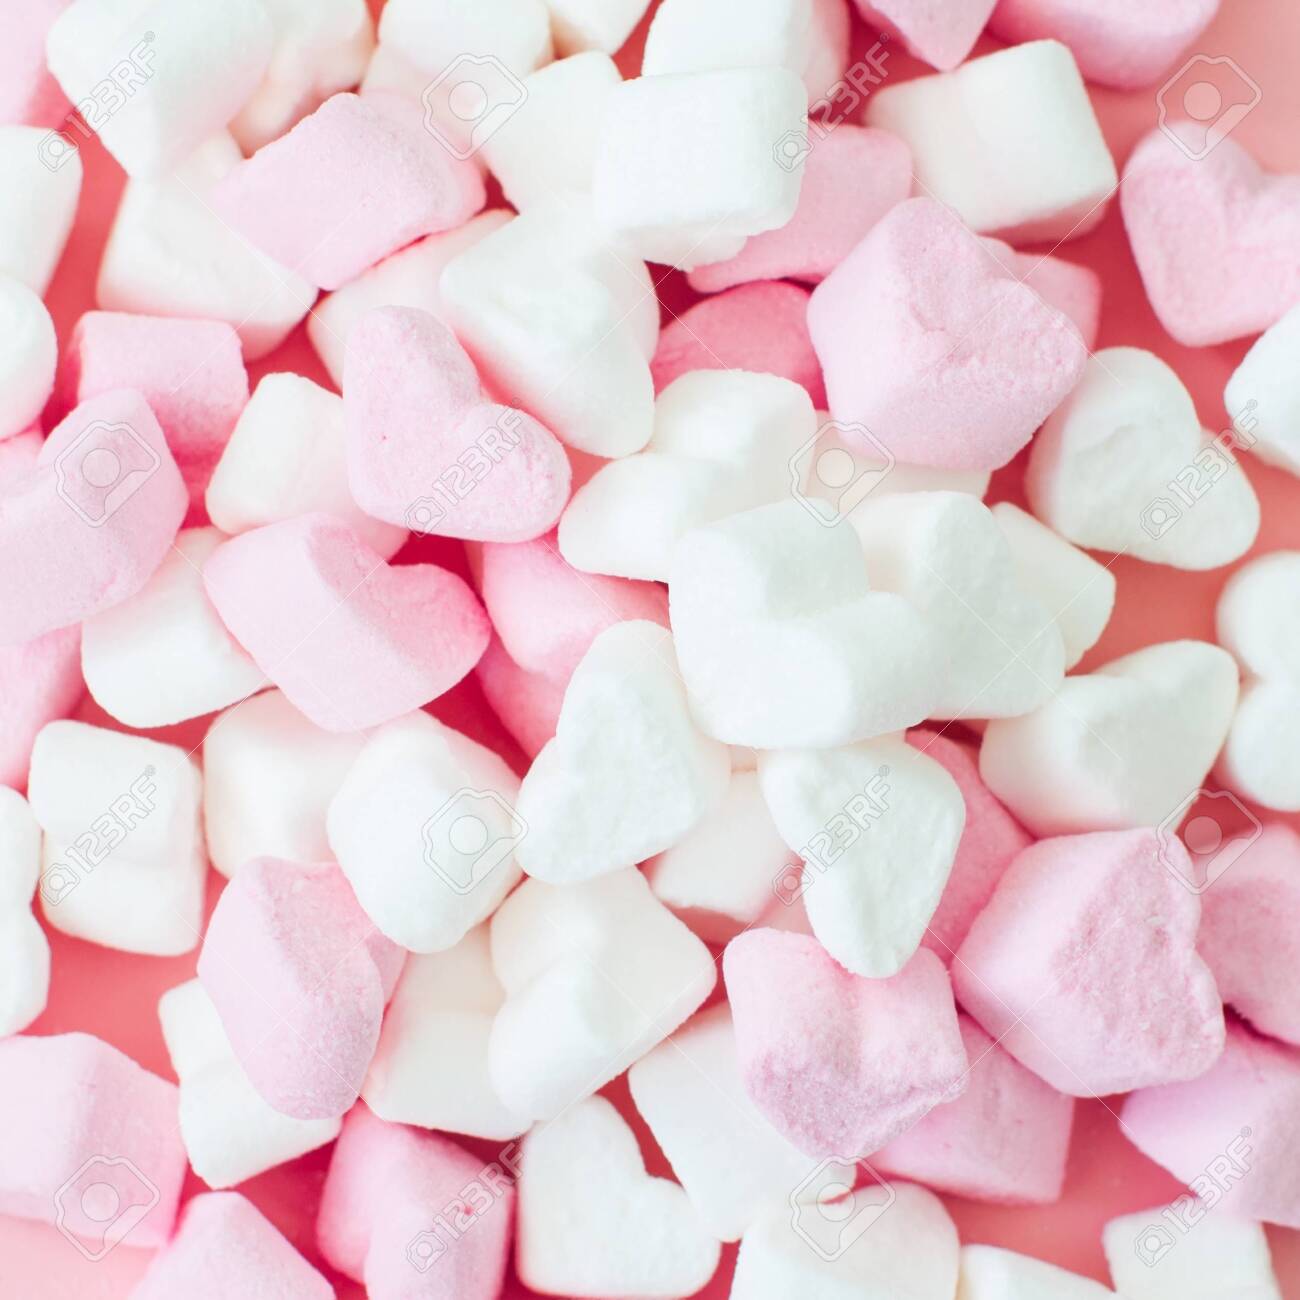 Pink Fluffy Heart Shaped Marshmallow Background Close Up Stock